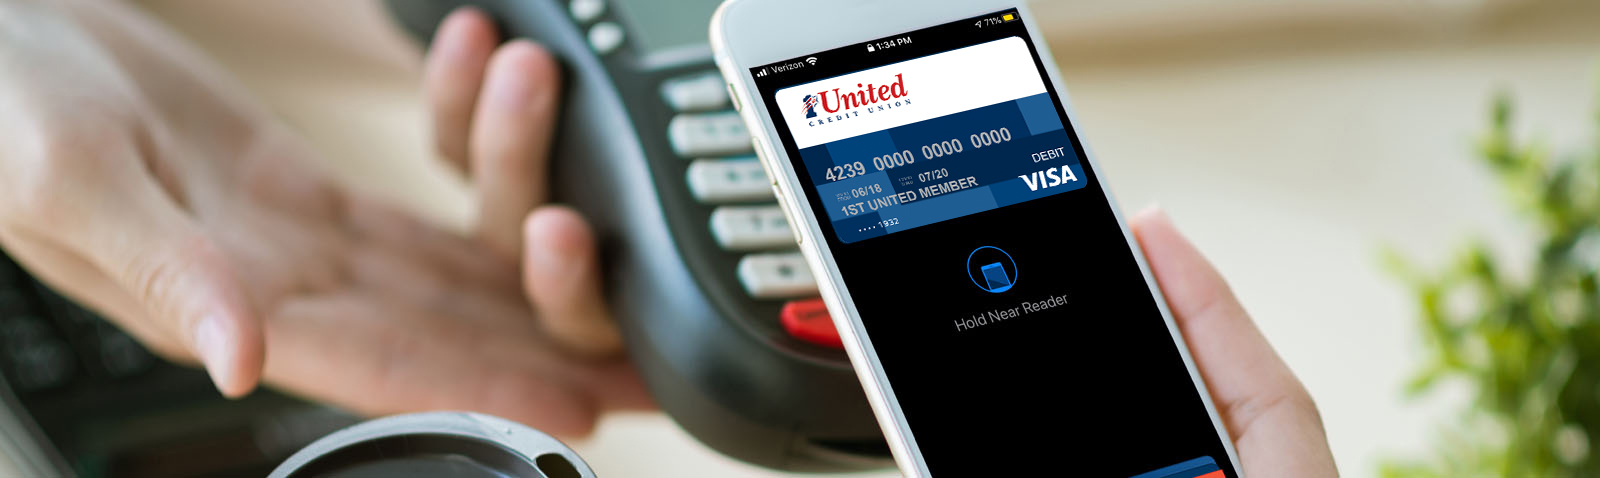 Paying with mobile wallet and a 1st United debit card